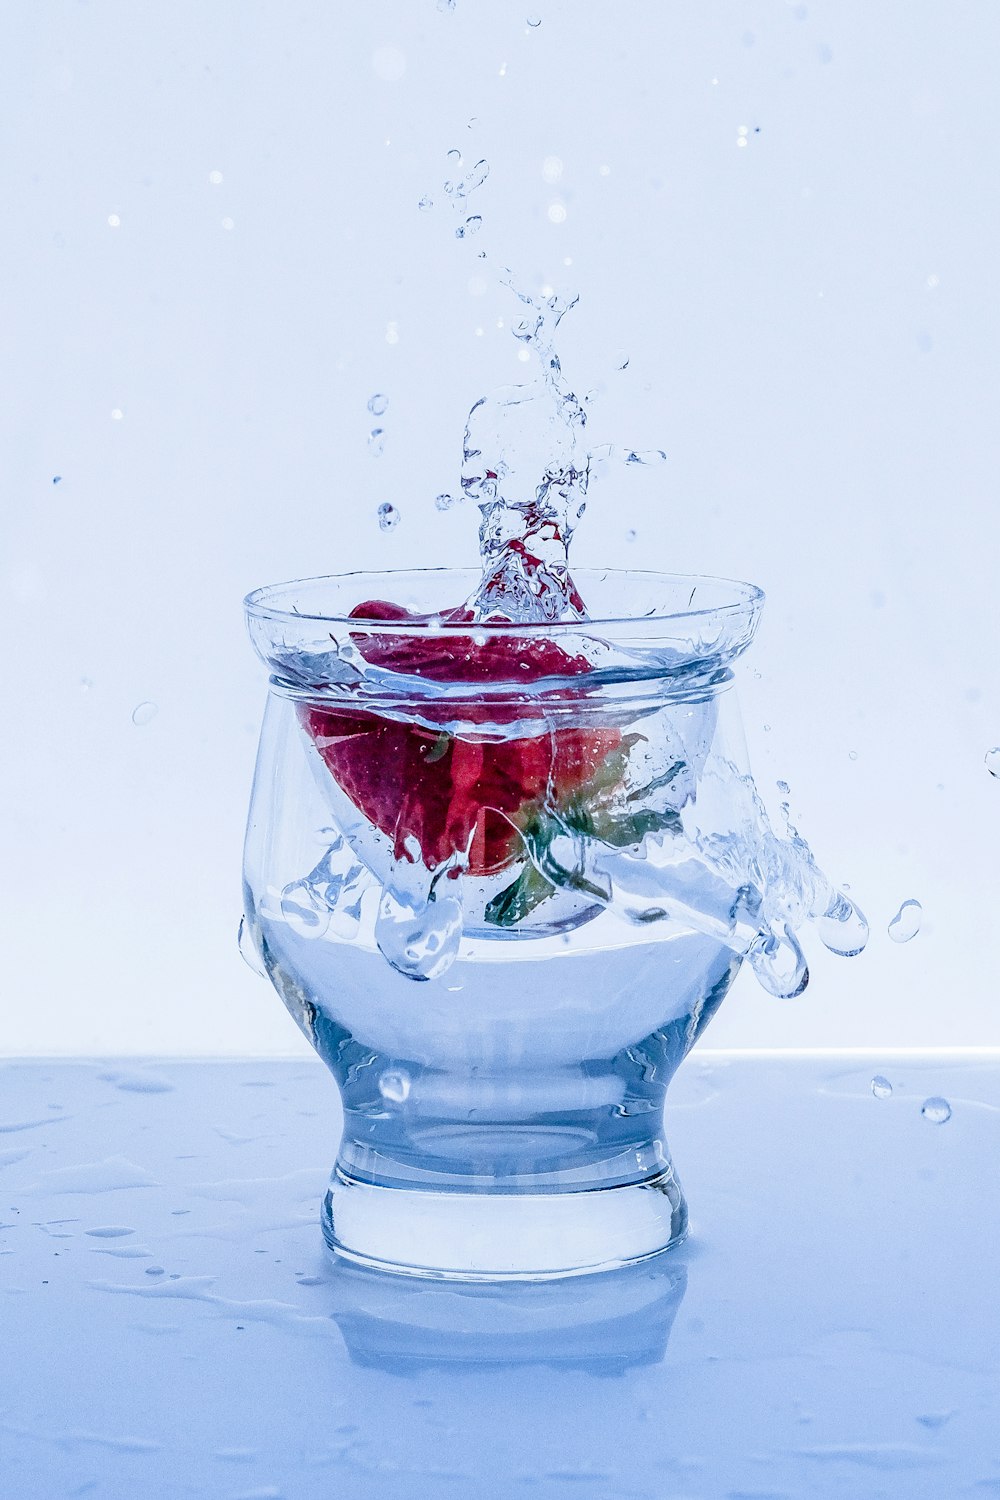 Red Rose In Water With Water Photo Free Water Image On Unsplash